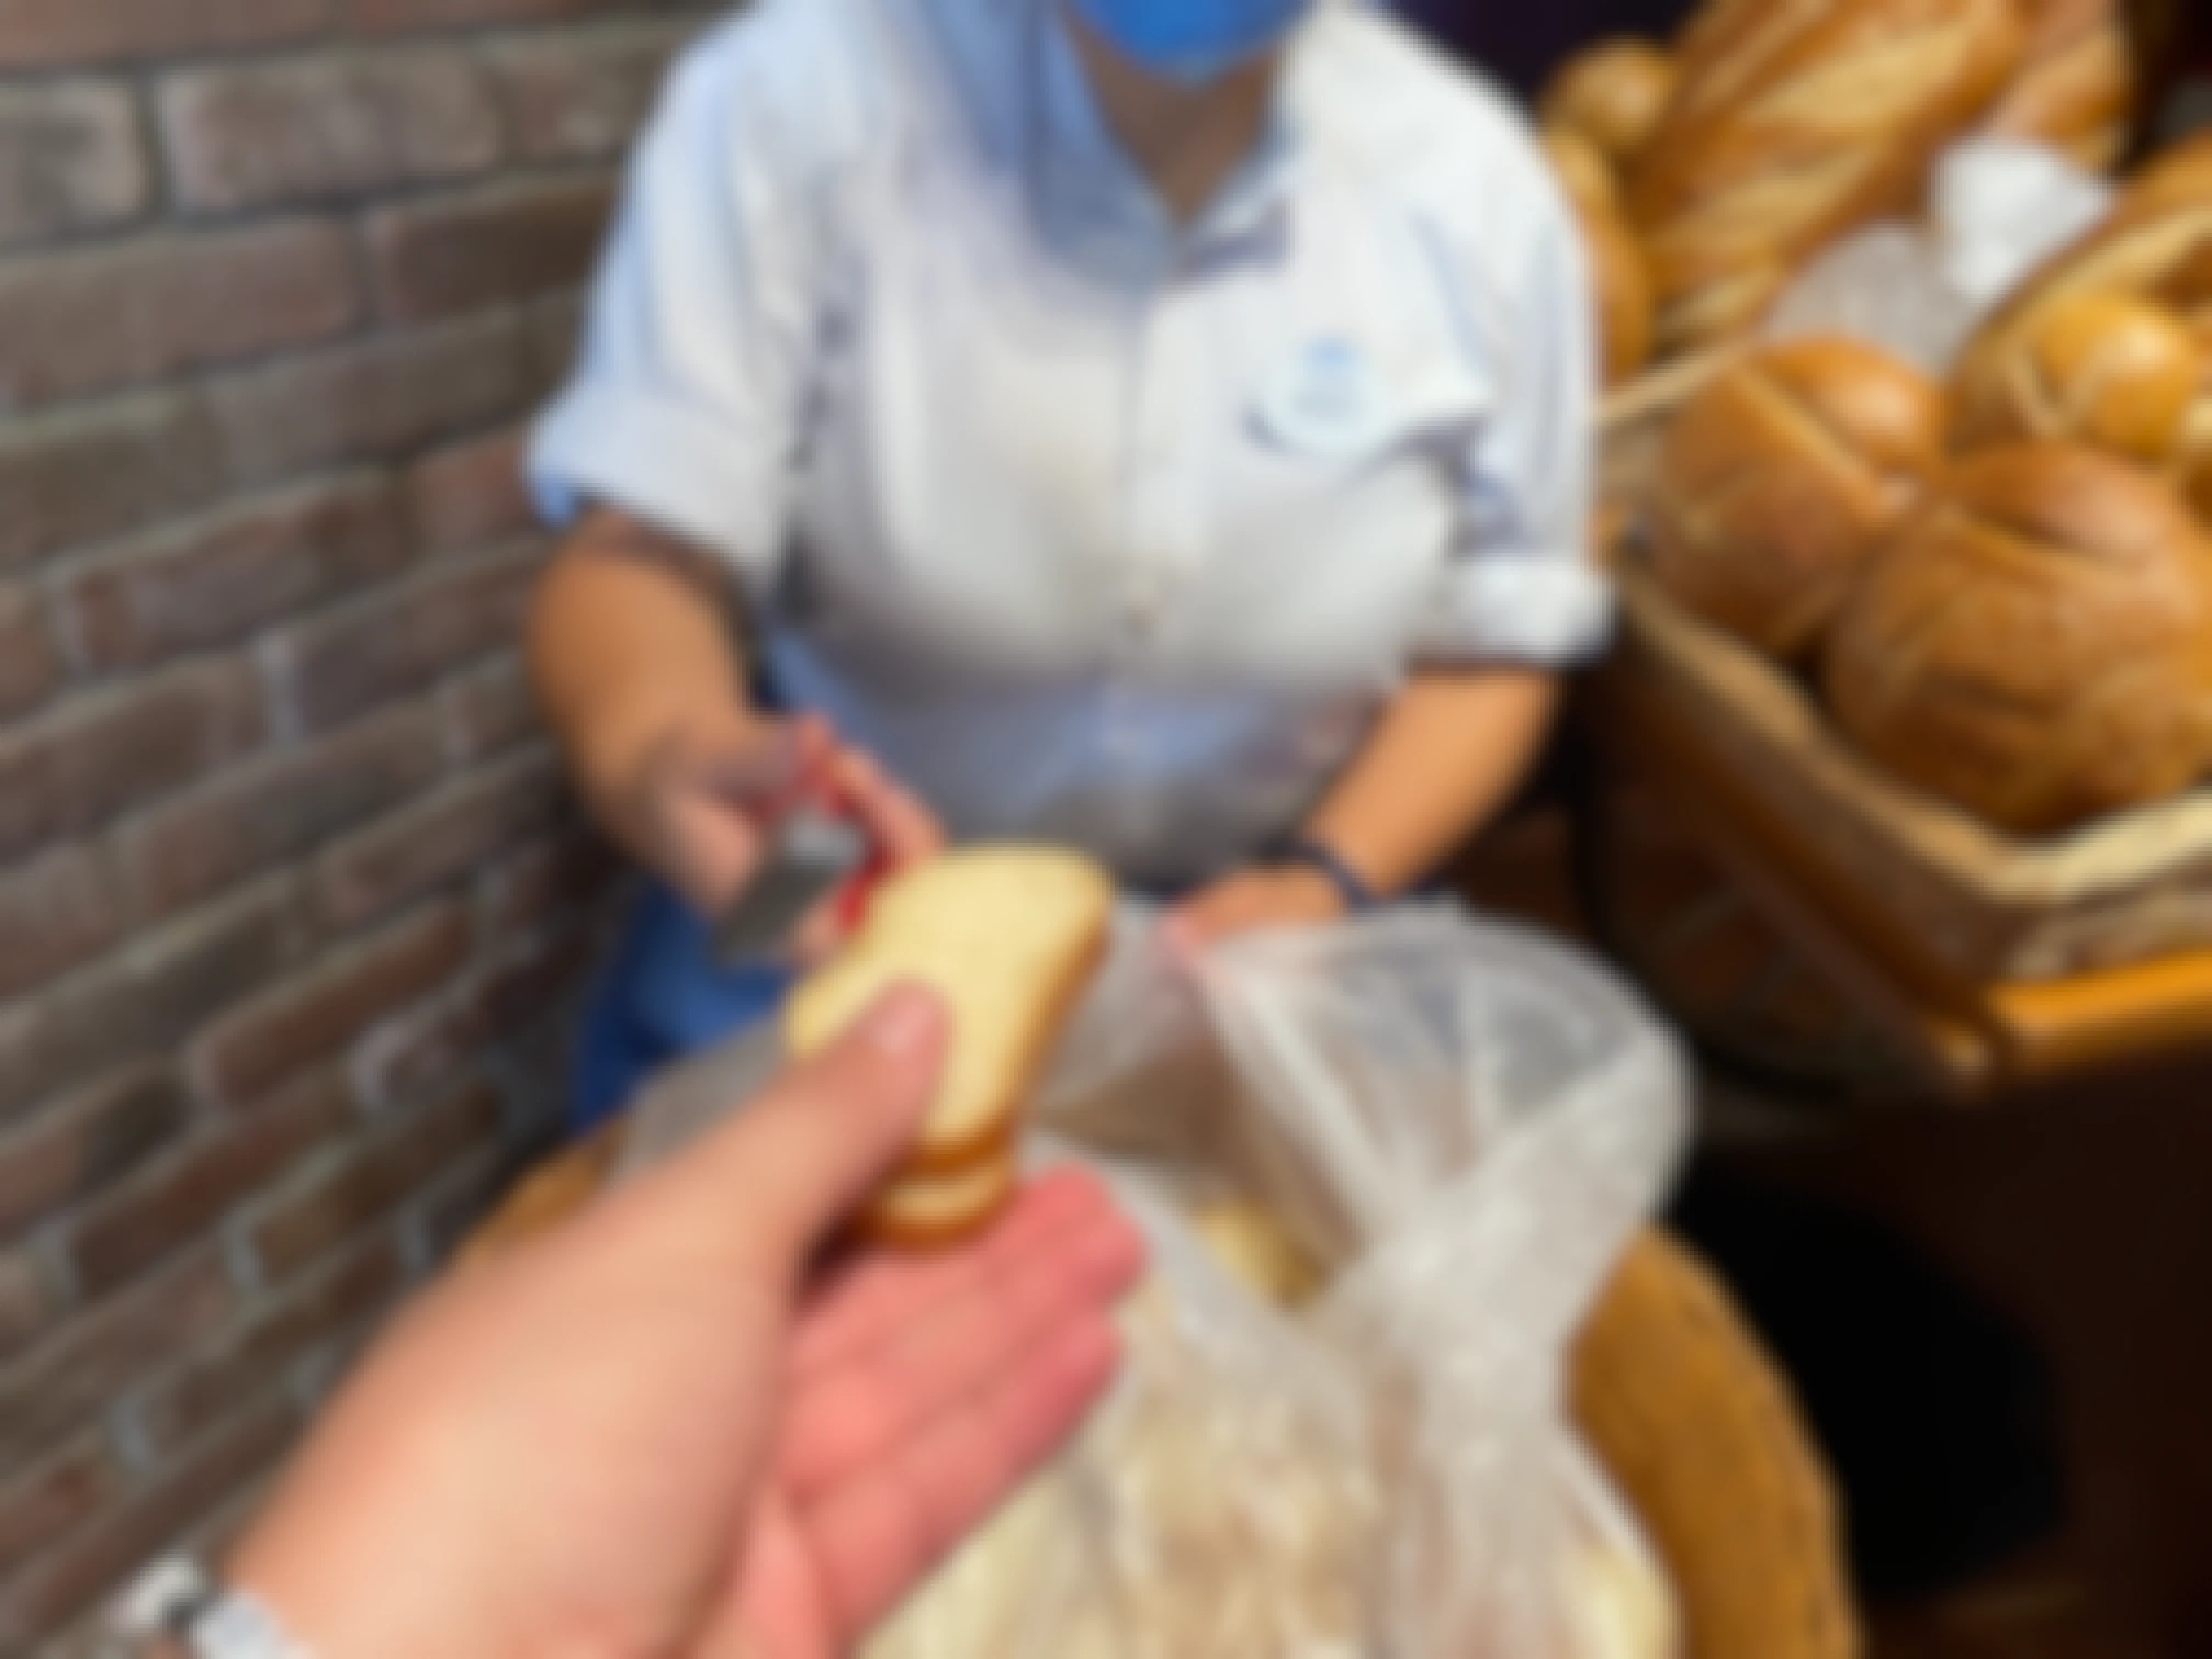 A Disney employee handing free bread to a patron in Boudoin Bakery at Disneyland.